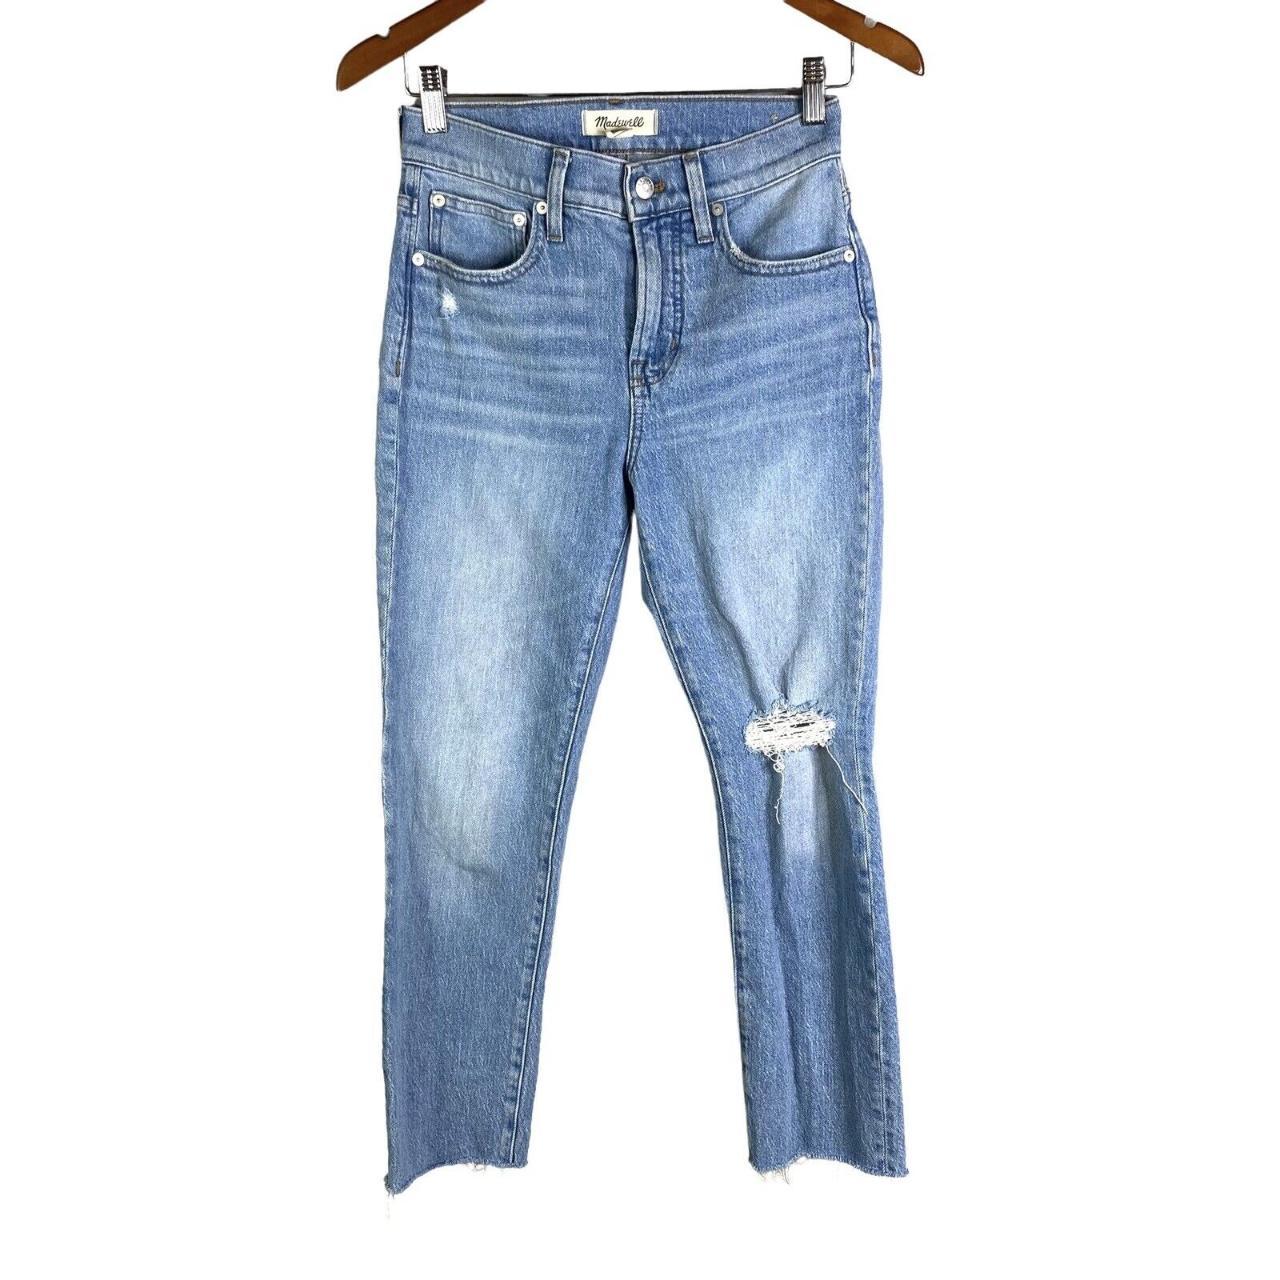 Madewell The Perfect Vintage Jean Womens Petite 25P... - Depop